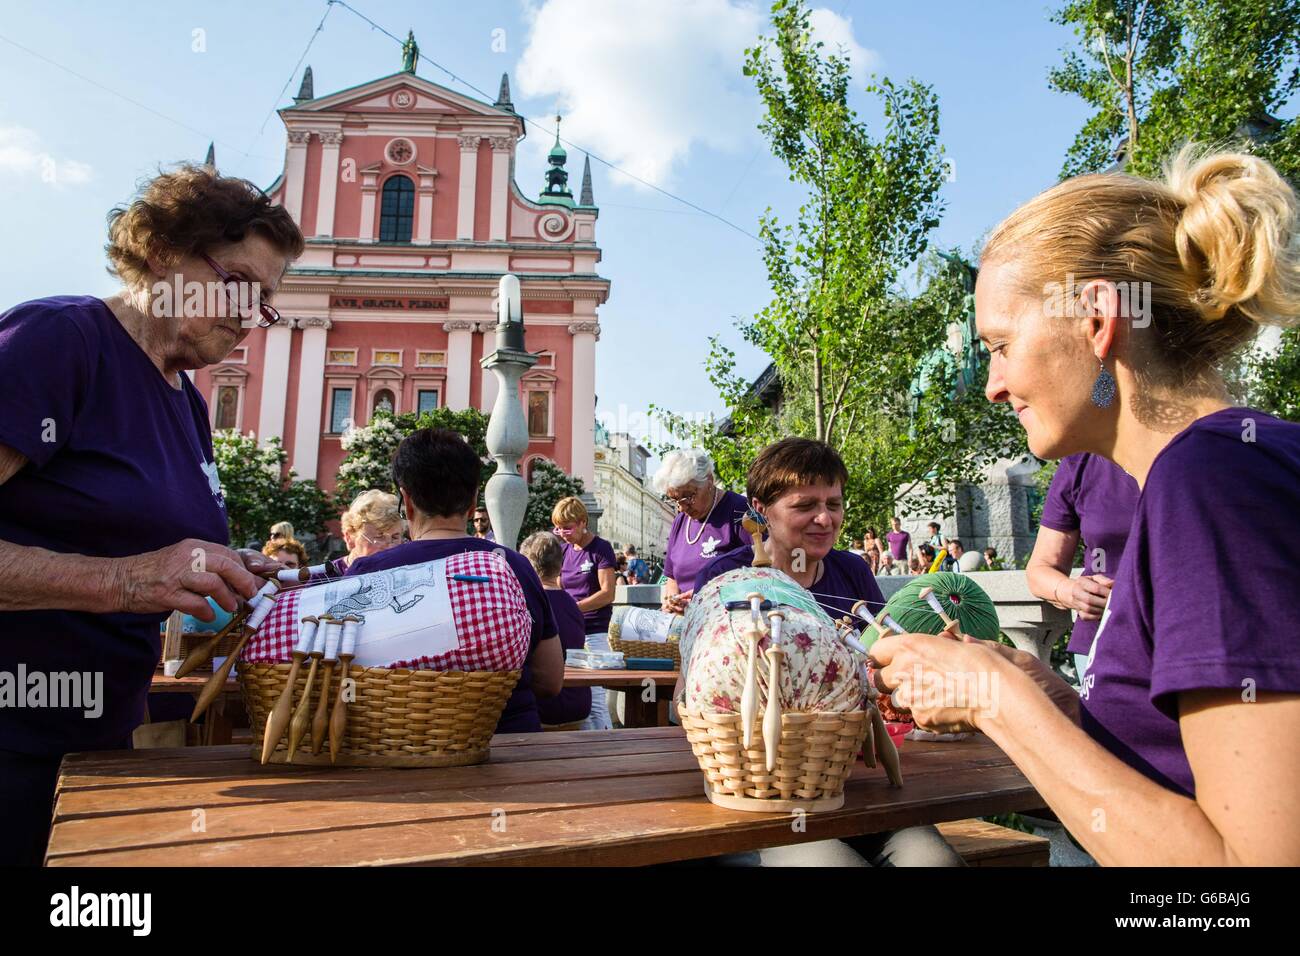 Ljubljana, Slovenia. 23rd June, 2016. Women make lace during a lacemaking event marking the beginning of the 17th OIDFA (international lace organization) World Lace Congress and General Assembly in Ljubljana, Slovenia, June 23, 2016. Nearly a thousand lace makers from all over the world attended the event on Friday. © Luka Dakskobler/Xinhua/Alamy Live News Stock Photo